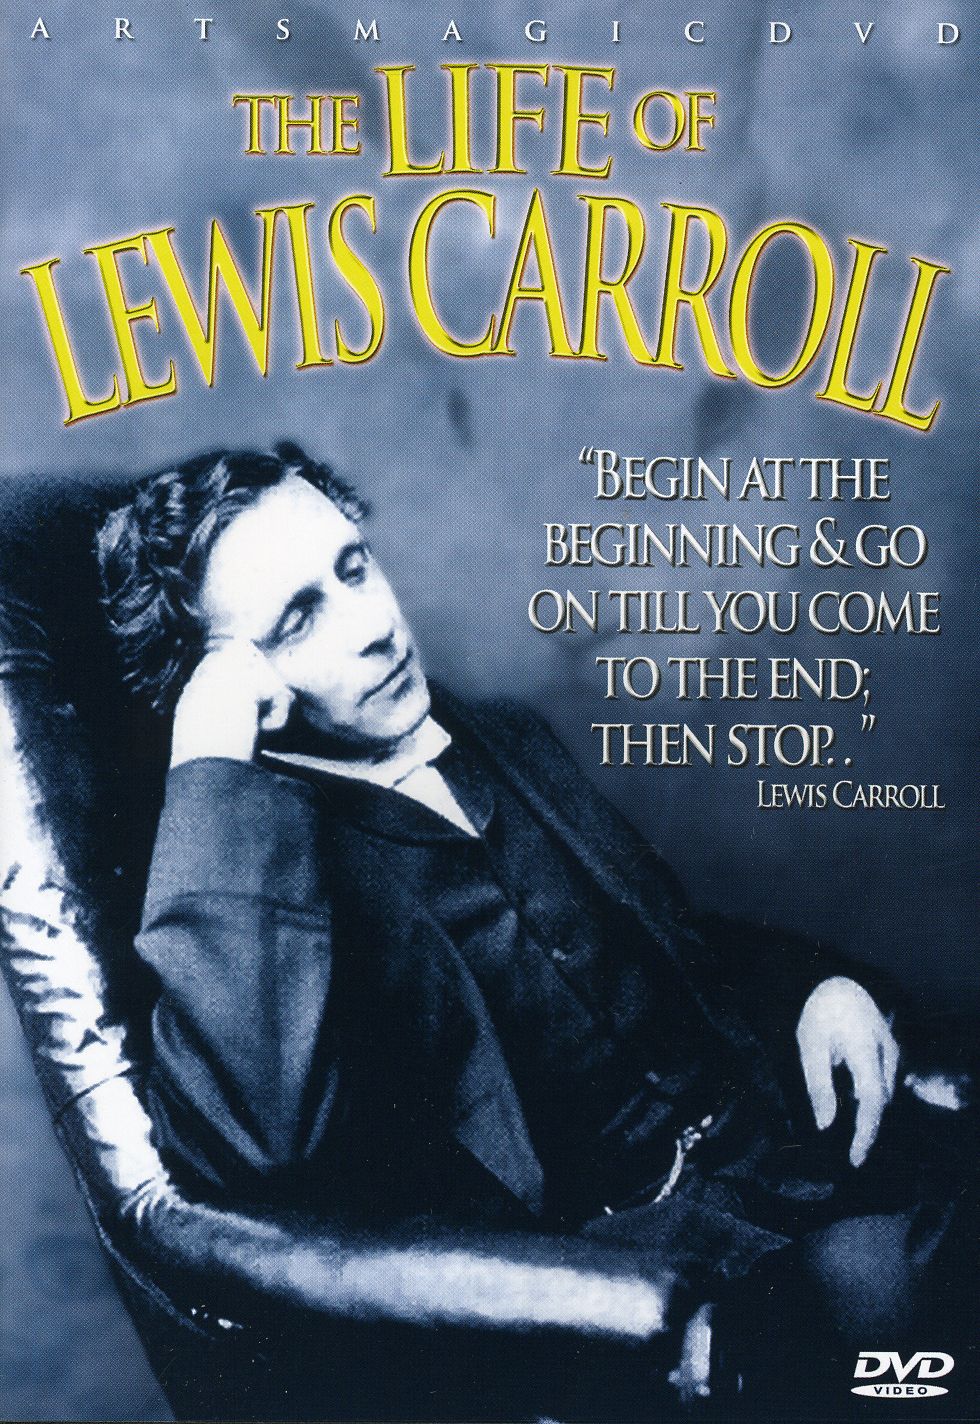 LIFE OF LEWIS CARROLL